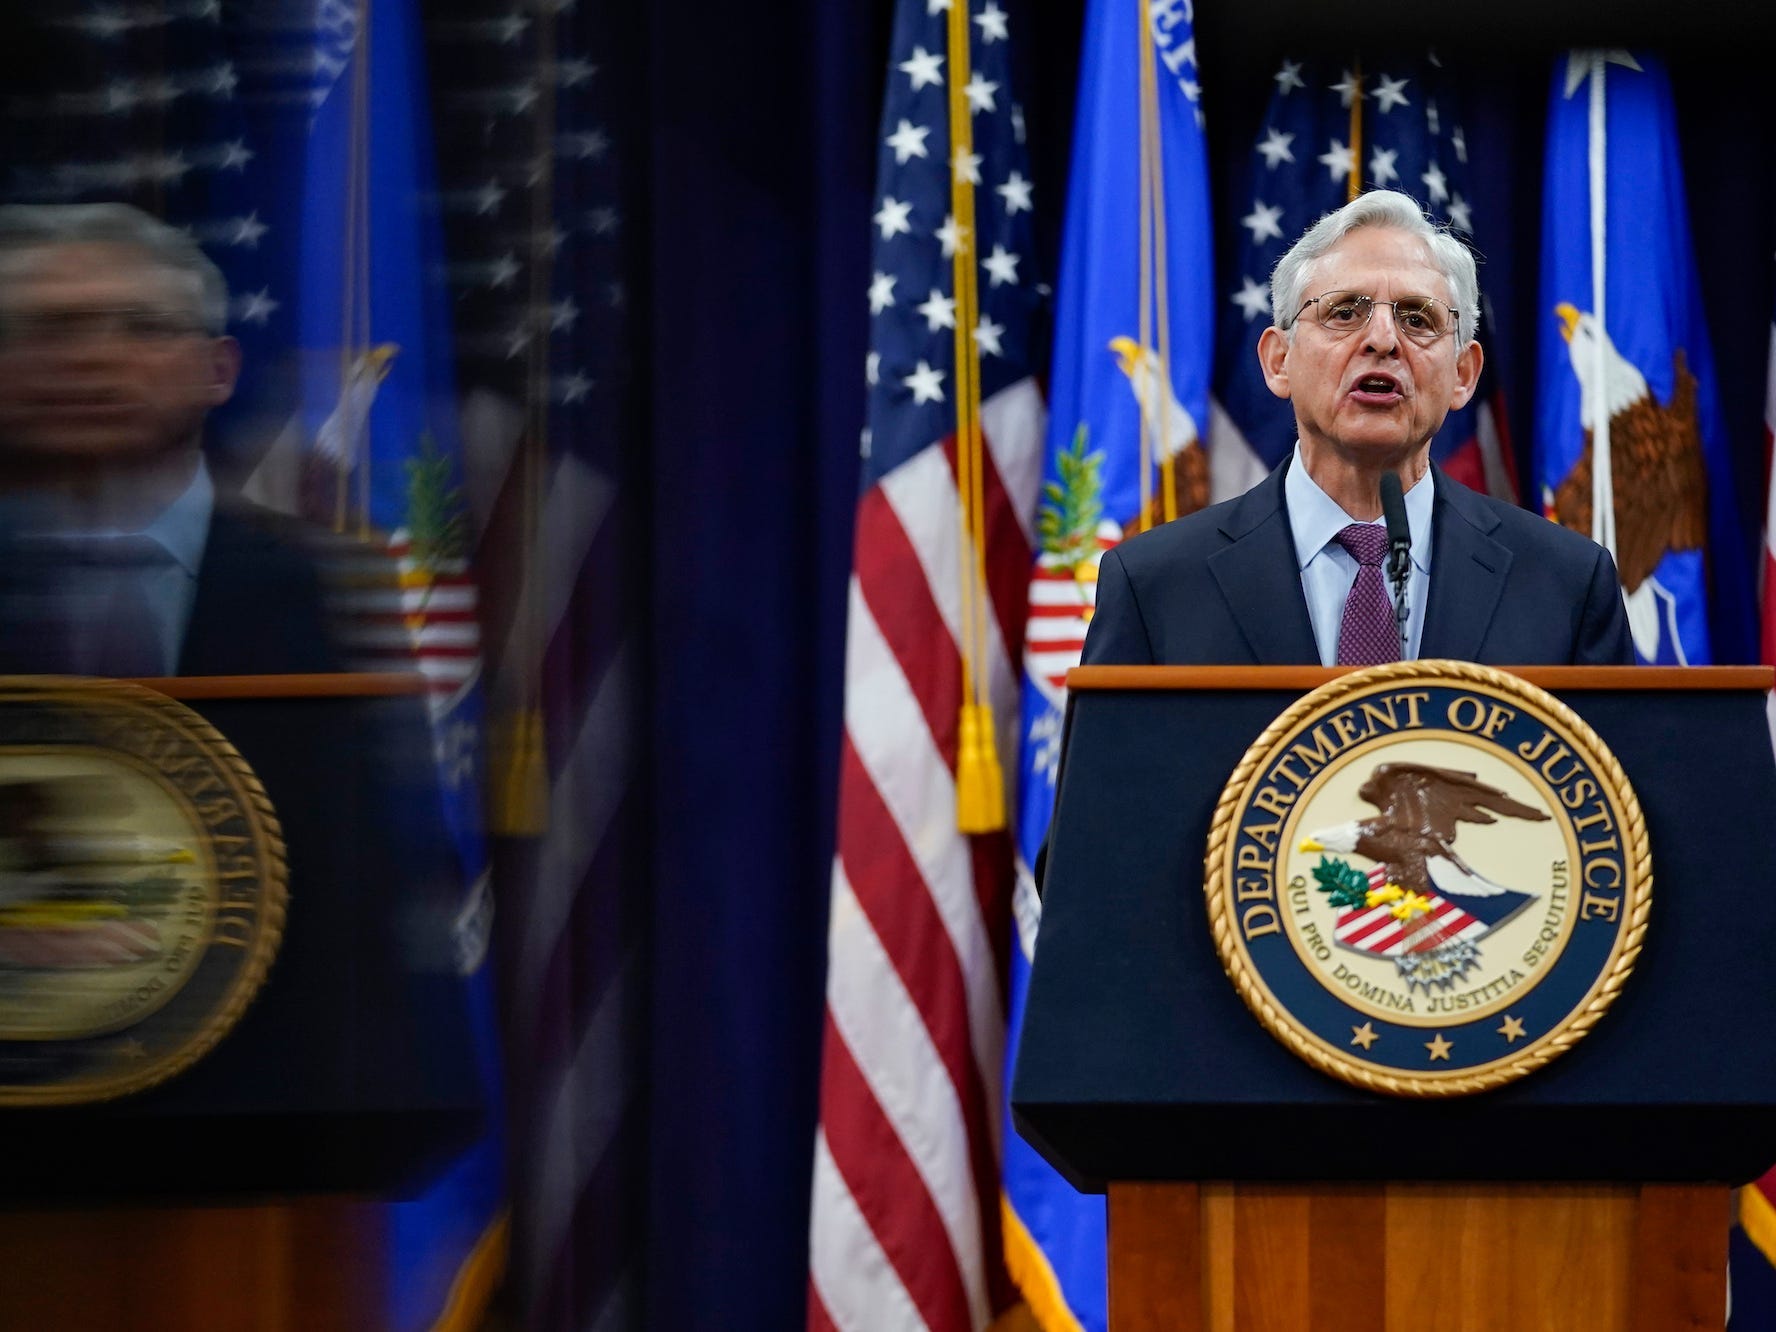 Attorney General Merrick Garland speaking at the Justice Department a day before the January 6, 2021, anniversary.